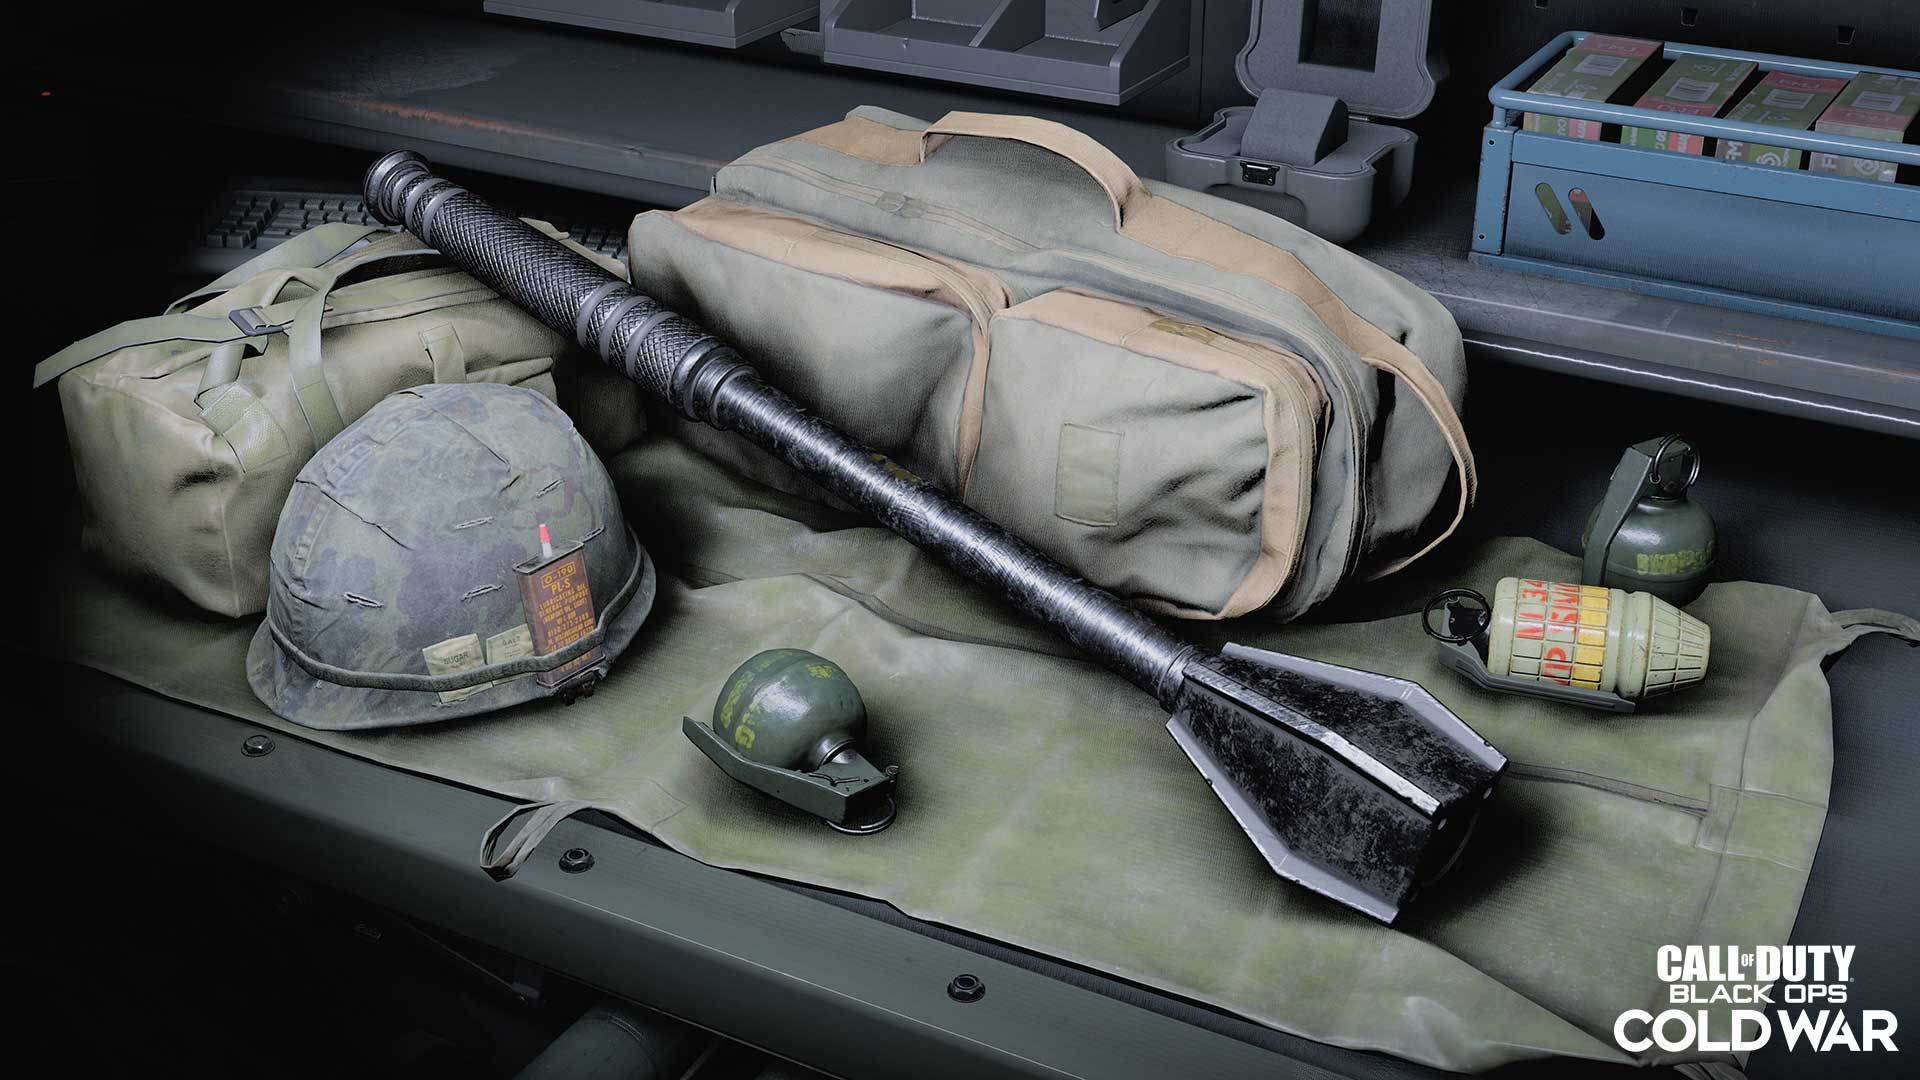 Season Four new melee weapon Mace next to other gear